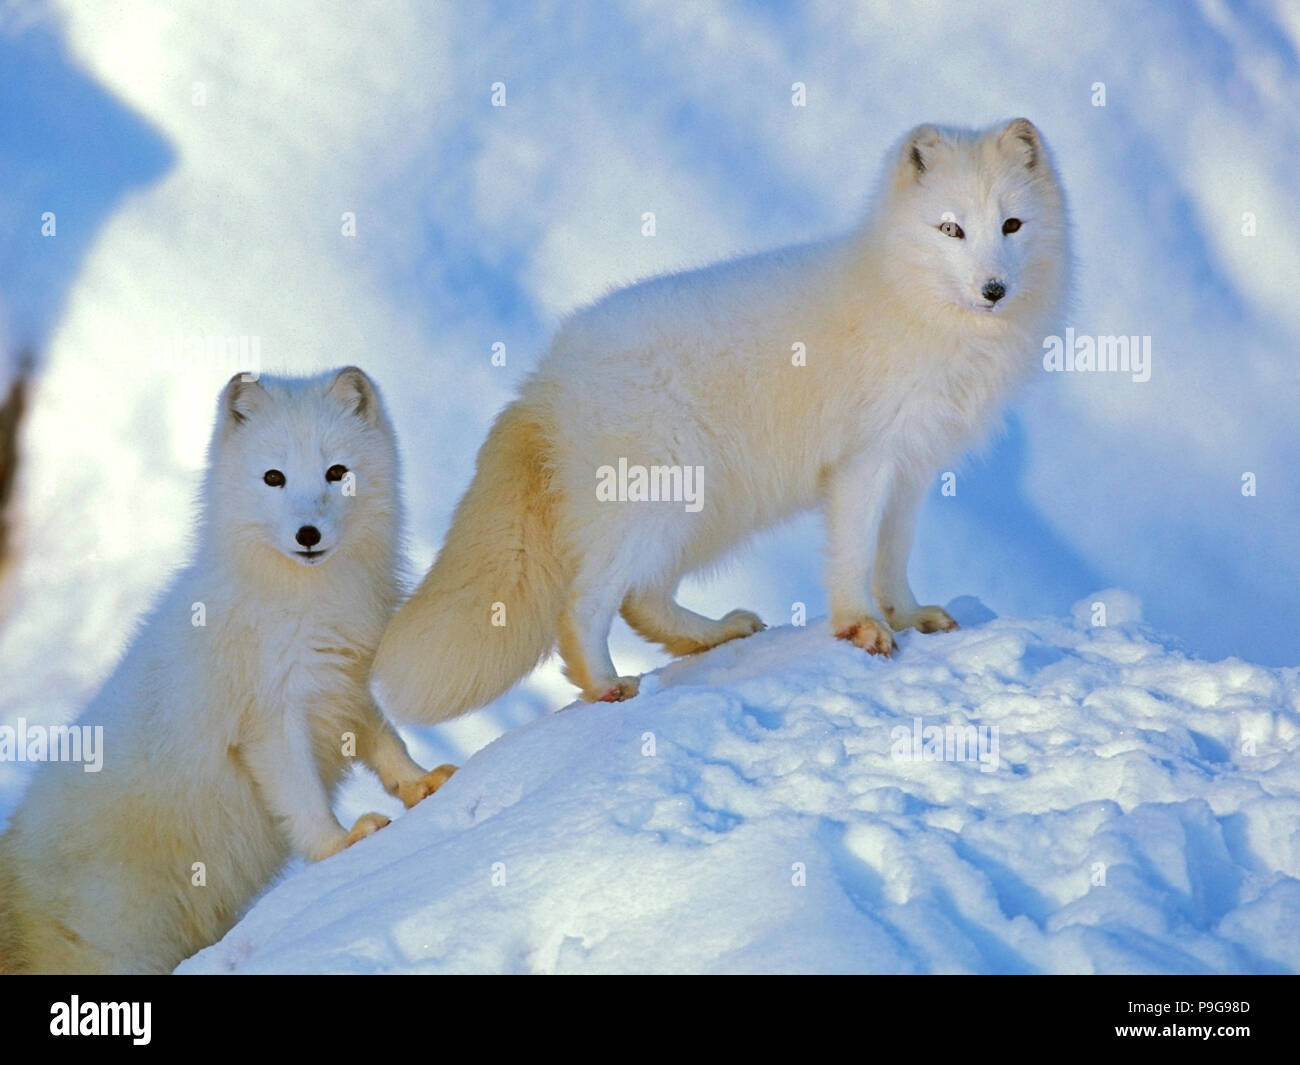 Pair of Arctic Foxes standing together on snowhill, alert Stock Photo